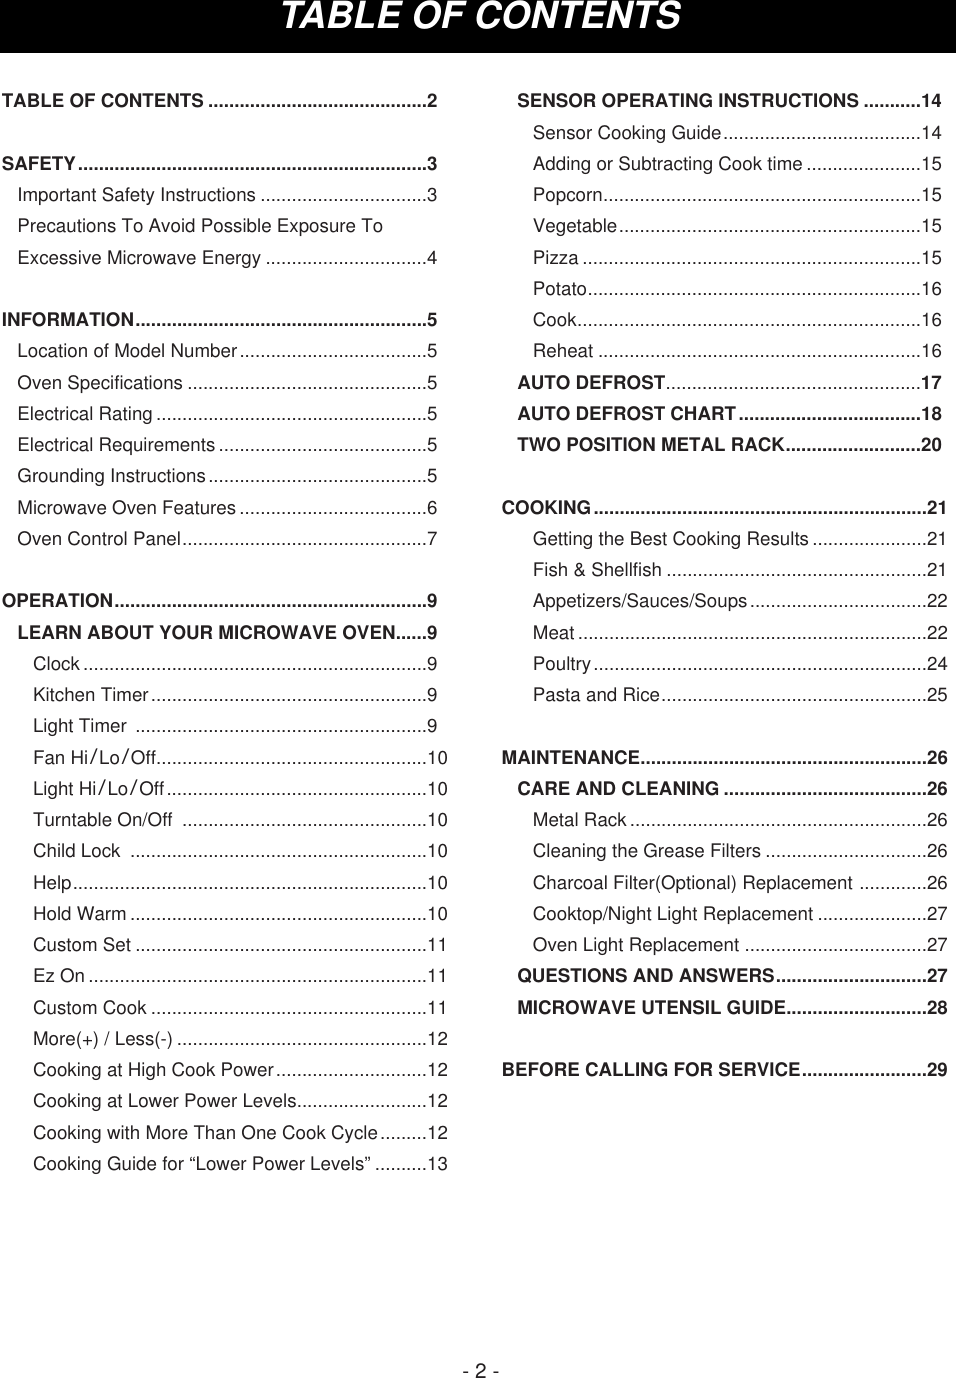 TABLE OF CONTENTS- 2 -TABLE OF CONTENTS ..........................................2SAFETY...................................................................3Important Safety Instructions ................................3Precautions To Avoid Possible Exposure ToExcessive Microwave Energy ...............................4INFORMATION........................................................5Location of Model Number....................................5Oven Specifications ..............................................5Electrical Rating ....................................................5Electrical Requirements ........................................5Grounding Instructions..........................................5Microwave Oven Features ....................................6Oven Control Panel...............................................7OPERATION............................................................9LEARN ABOUT YOUR MICROWAVE OVEN......9Clock ..................................................................9Kitchen Timer.....................................................9Light Timer  ........................................................9Fan Hi/Lo/Off....................................................10Light Hi/Lo/Off..................................................10Turntable On/Off  ...............................................10Child Lock  .........................................................10Help....................................................................10Hold Warm .........................................................10Custom Set ........................................................11Ez On .................................................................11Custom Cook .....................................................11More(+) / Less(-) ................................................12Cooking at High Cook Power.............................12Cooking at Lower Power Levels.........................12Cooking with More Than One Cook Cycle.........12Cooking Guide for “Lower Power Levels” ..........13SENSOR OPERATING INSTRUCTIONS ...........14Sensor Cooking Guide......................................14Adding or Subtracting Cook time ......................15Popcorn.............................................................15Vegetable..........................................................15Pizza .................................................................15Potato................................................................16Cook..................................................................16Reheat ..............................................................16AUTO DEFROST.................................................17AUTO DEFROST CHART...................................18TWO POSITION METAL RACK..........................20COOKING................................................................21Getting the Best Cooking Results ......................21Fish &amp; Shellfish ..................................................21Appetizers/Sauces/Soups..................................22Meat ...................................................................22Poultry................................................................24Pasta and Rice...................................................25MAINTENANCE.......................................................26CARE AND CLEANING .......................................26Metal Rack .........................................................26Cleaning the Grease Filters ...............................26Charcoal Filter(Optional) Replacement .............26Cooktop/Night Light Replacement .....................27Oven Light Replacement ...................................27QUESTIONS AND ANSWERS.............................27MICROWAVE UTENSIL GUIDE...........................28BEFORE CALLING FOR SERVICE........................29